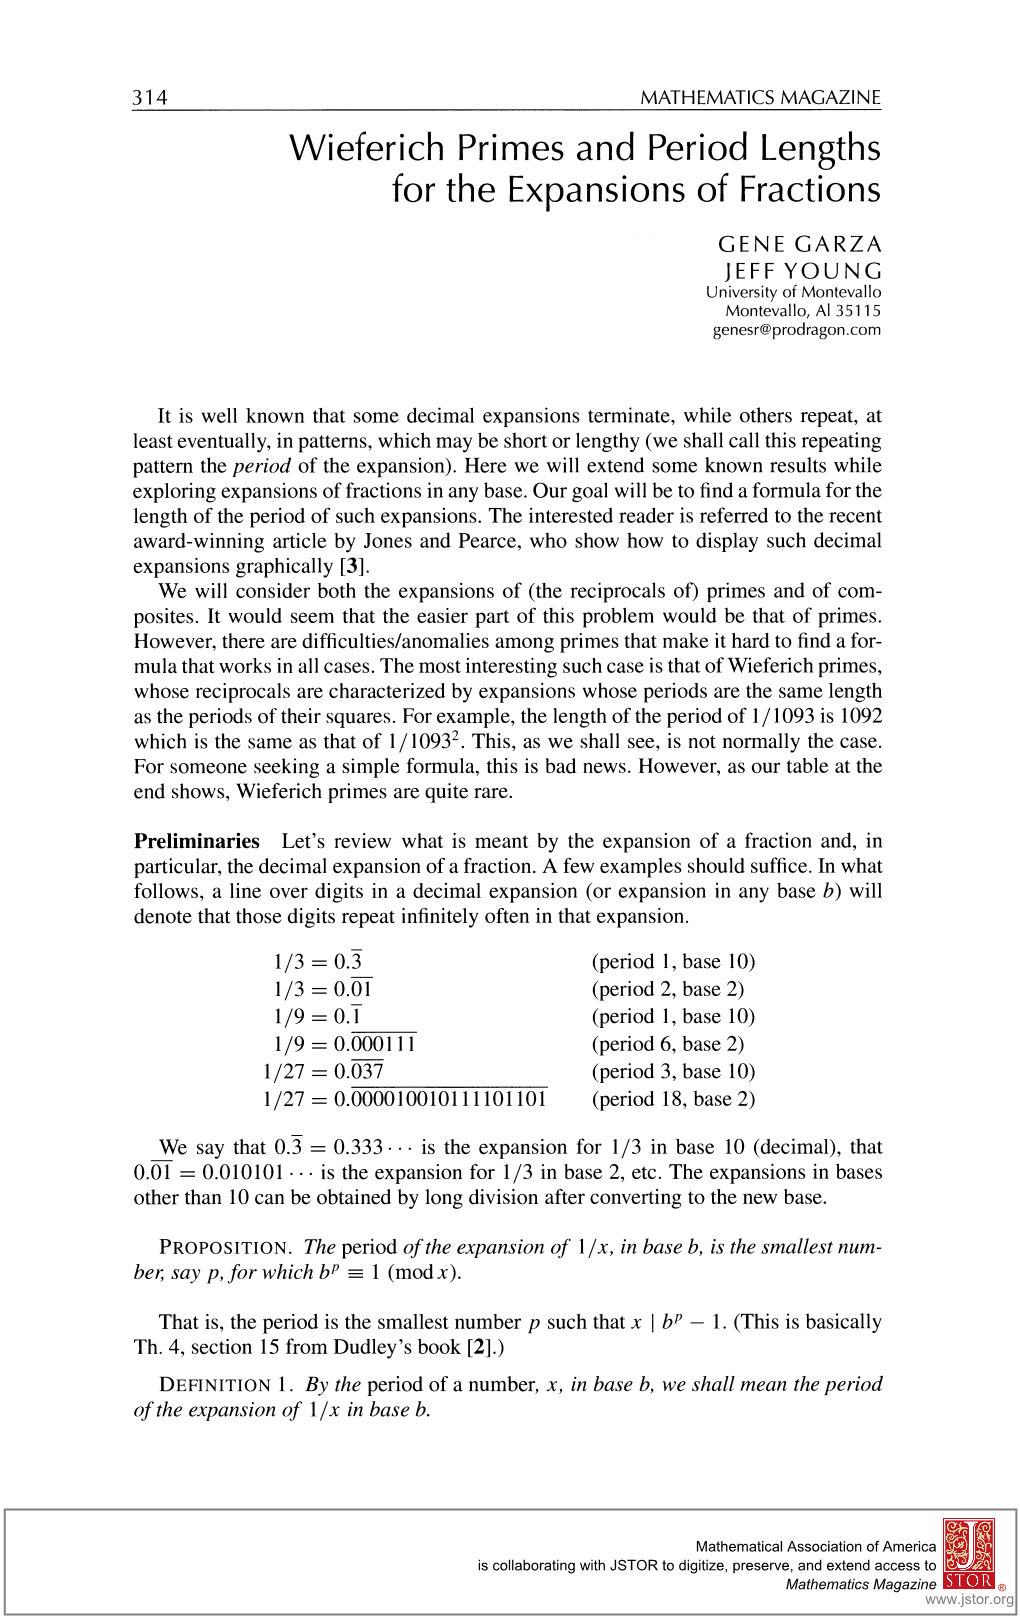 Wieferich Primes and Period Lengths for the Expansions of Fractions